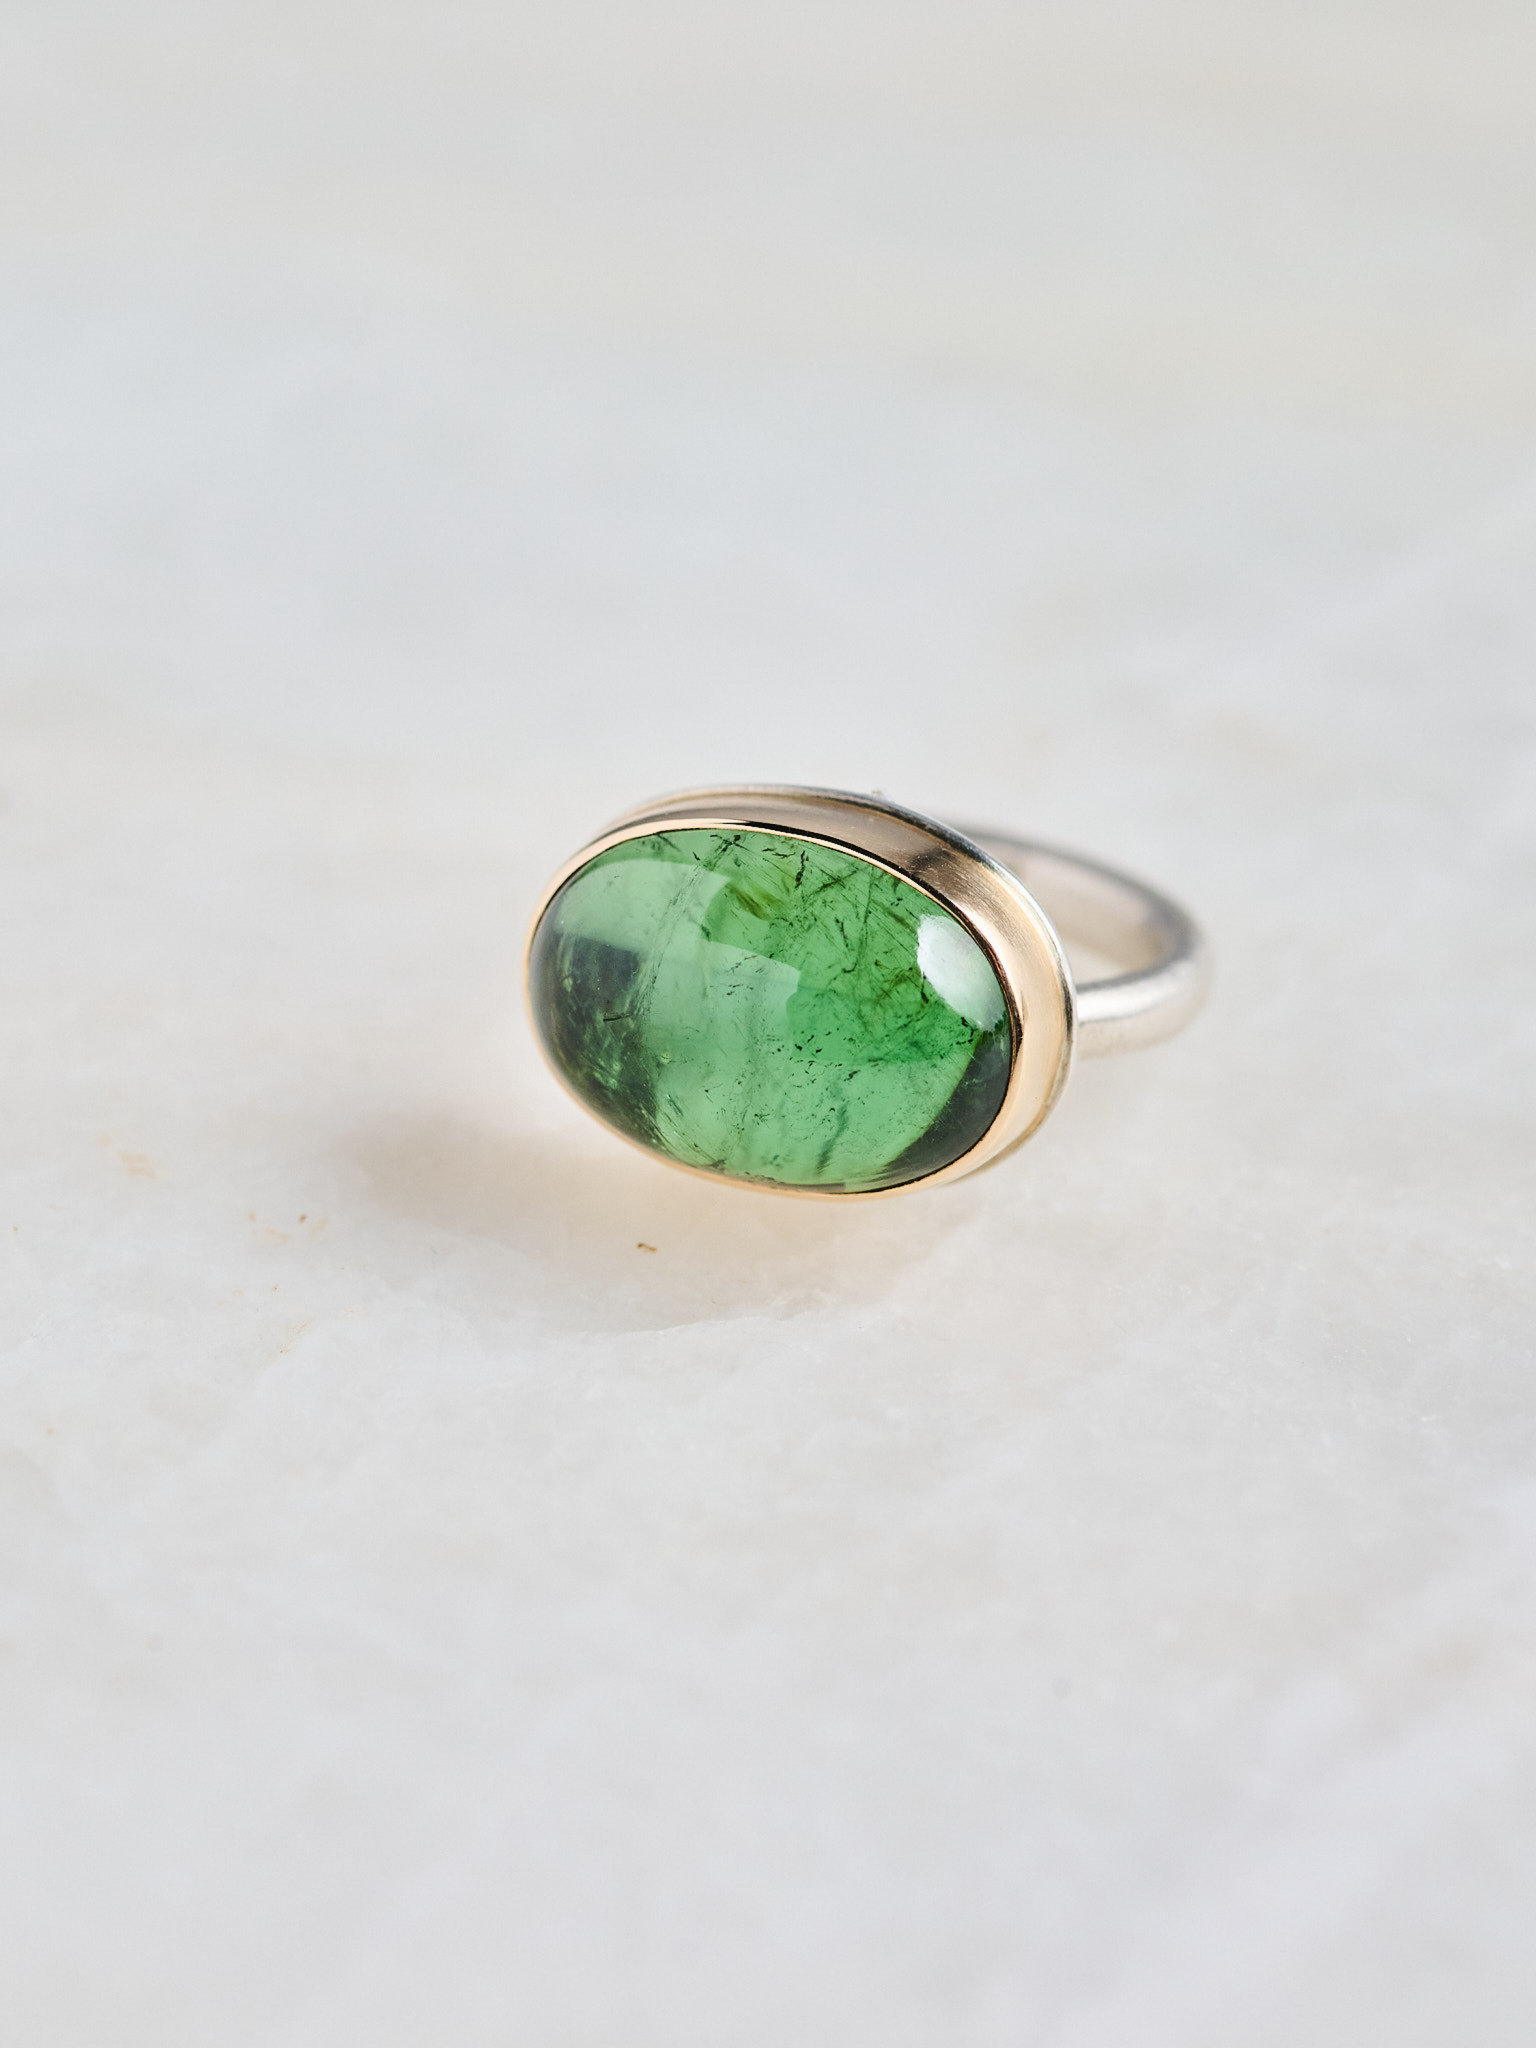 Oval Green Tourmaline Ring - Size 7